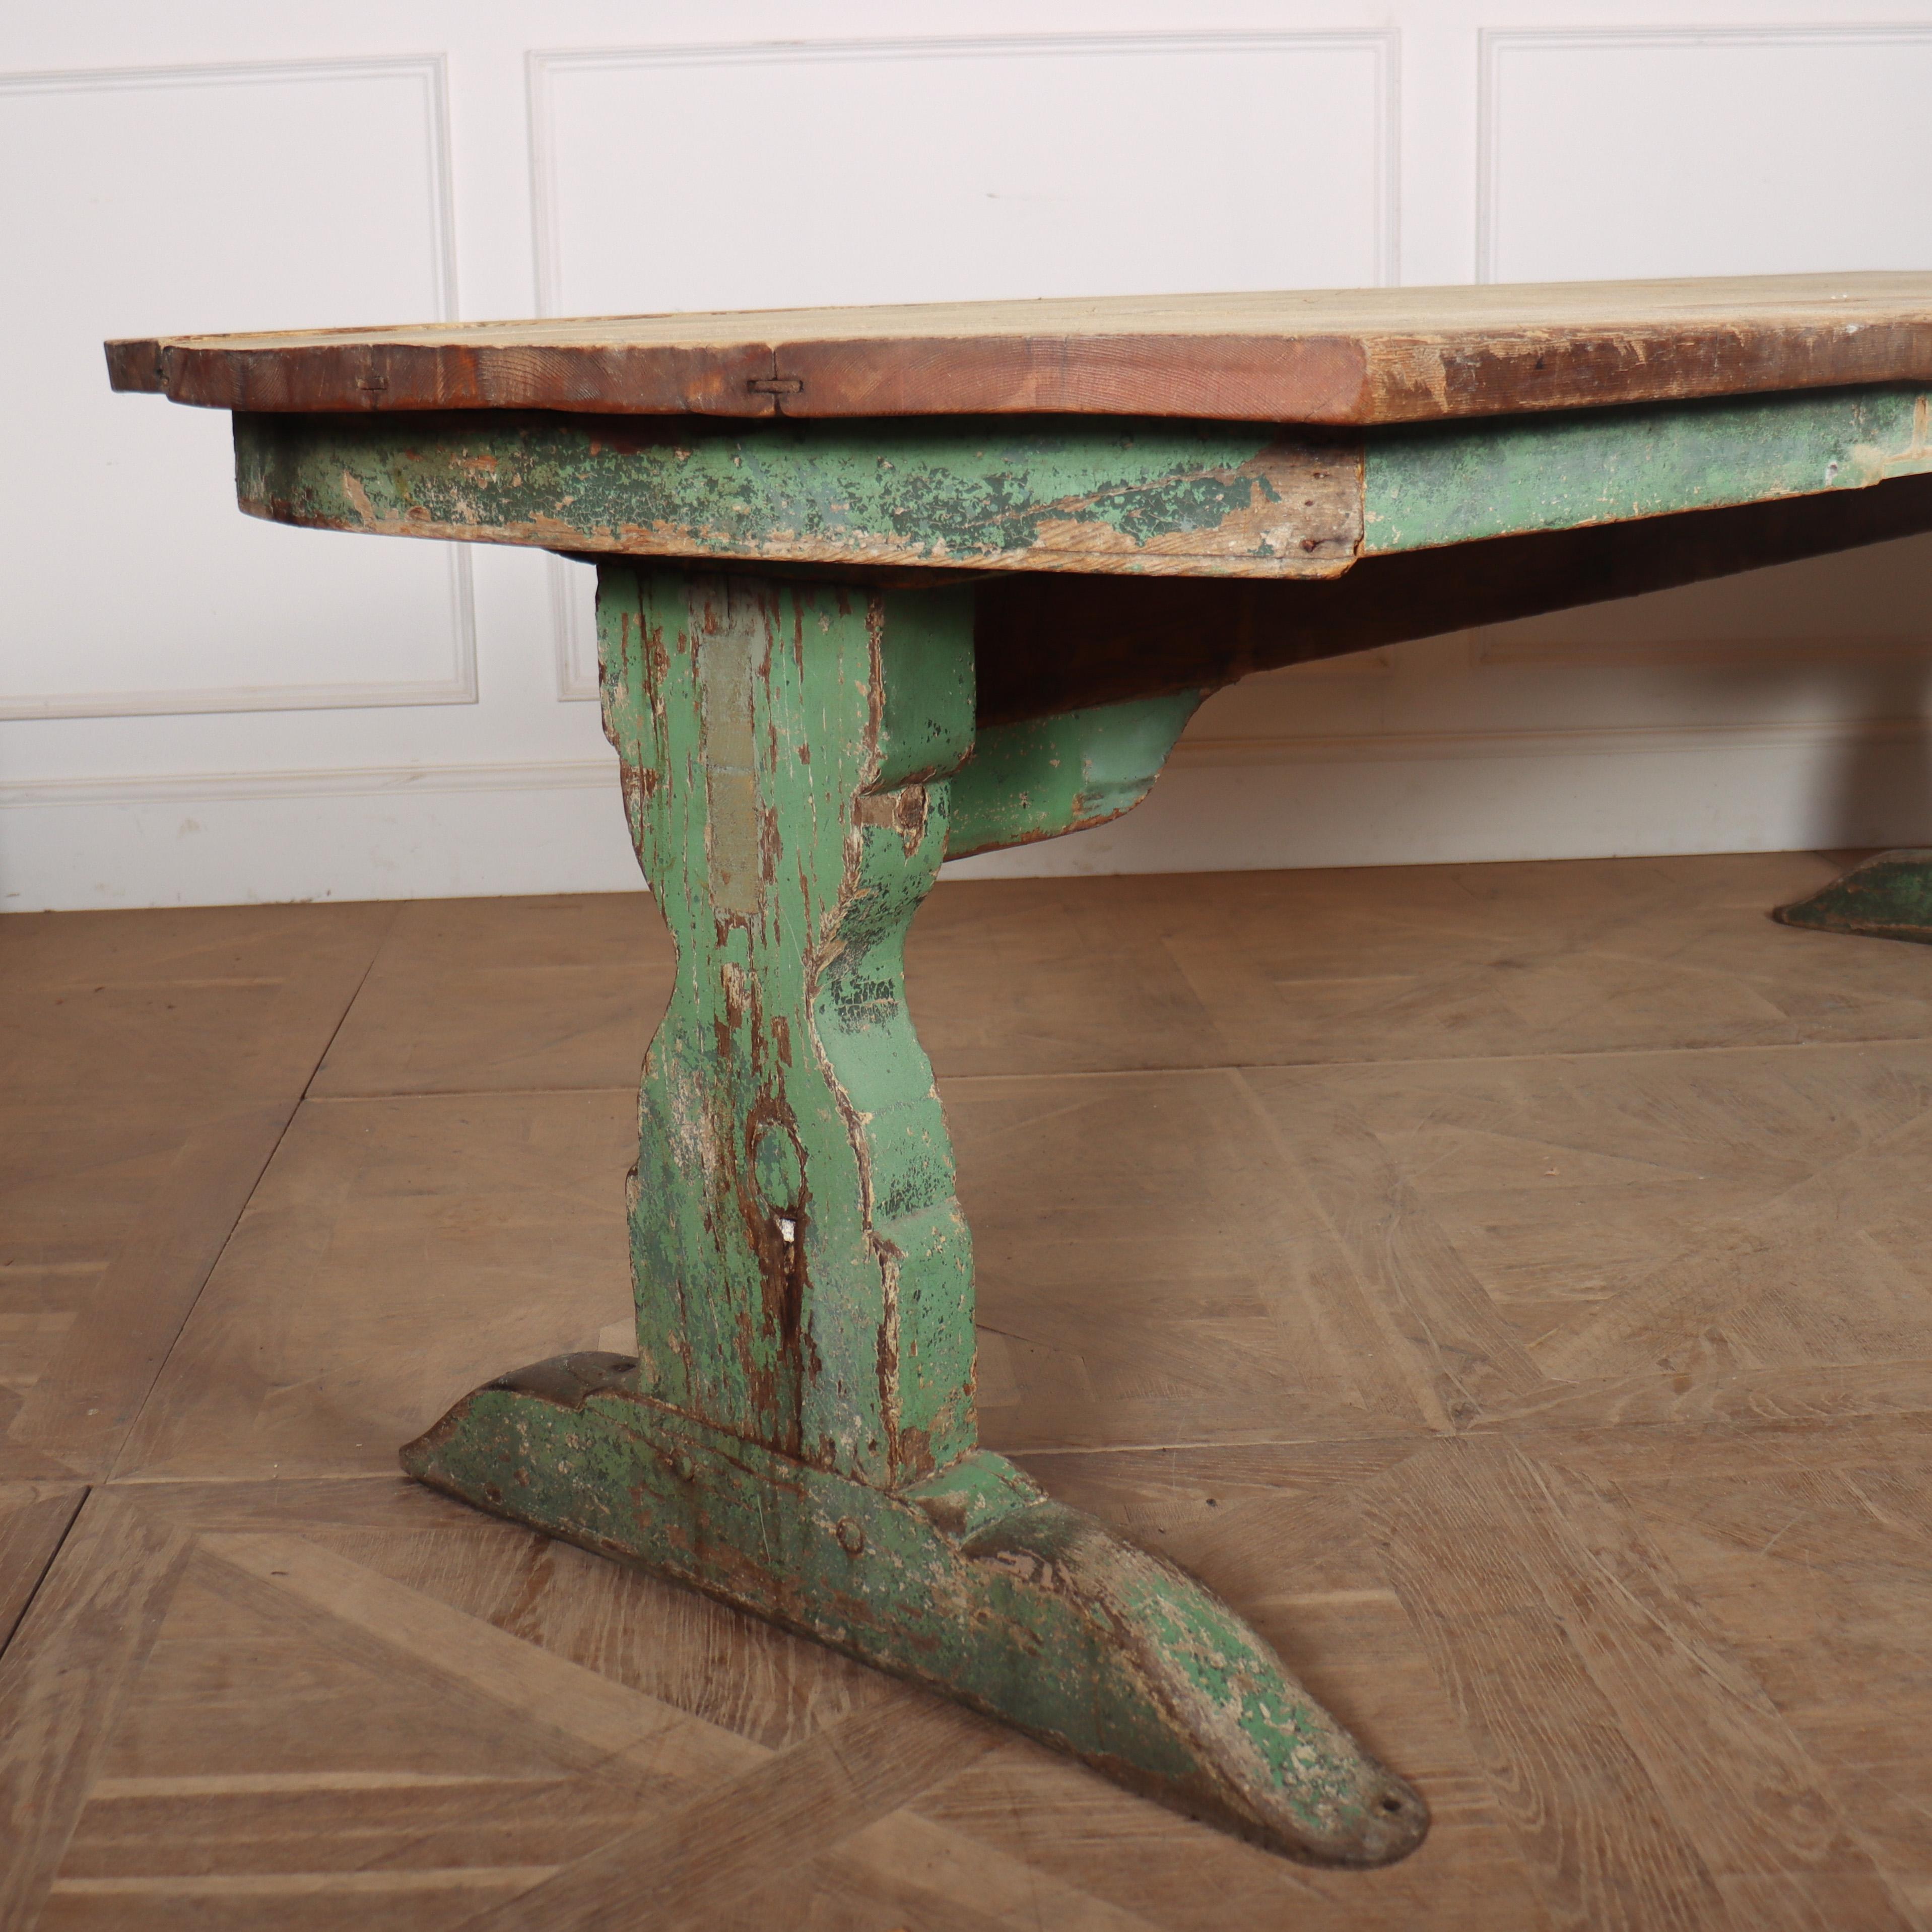 Wonderful late 18th C English trestle table with an original painted finish and bowed ends. 1780.

Clearance is 25.5